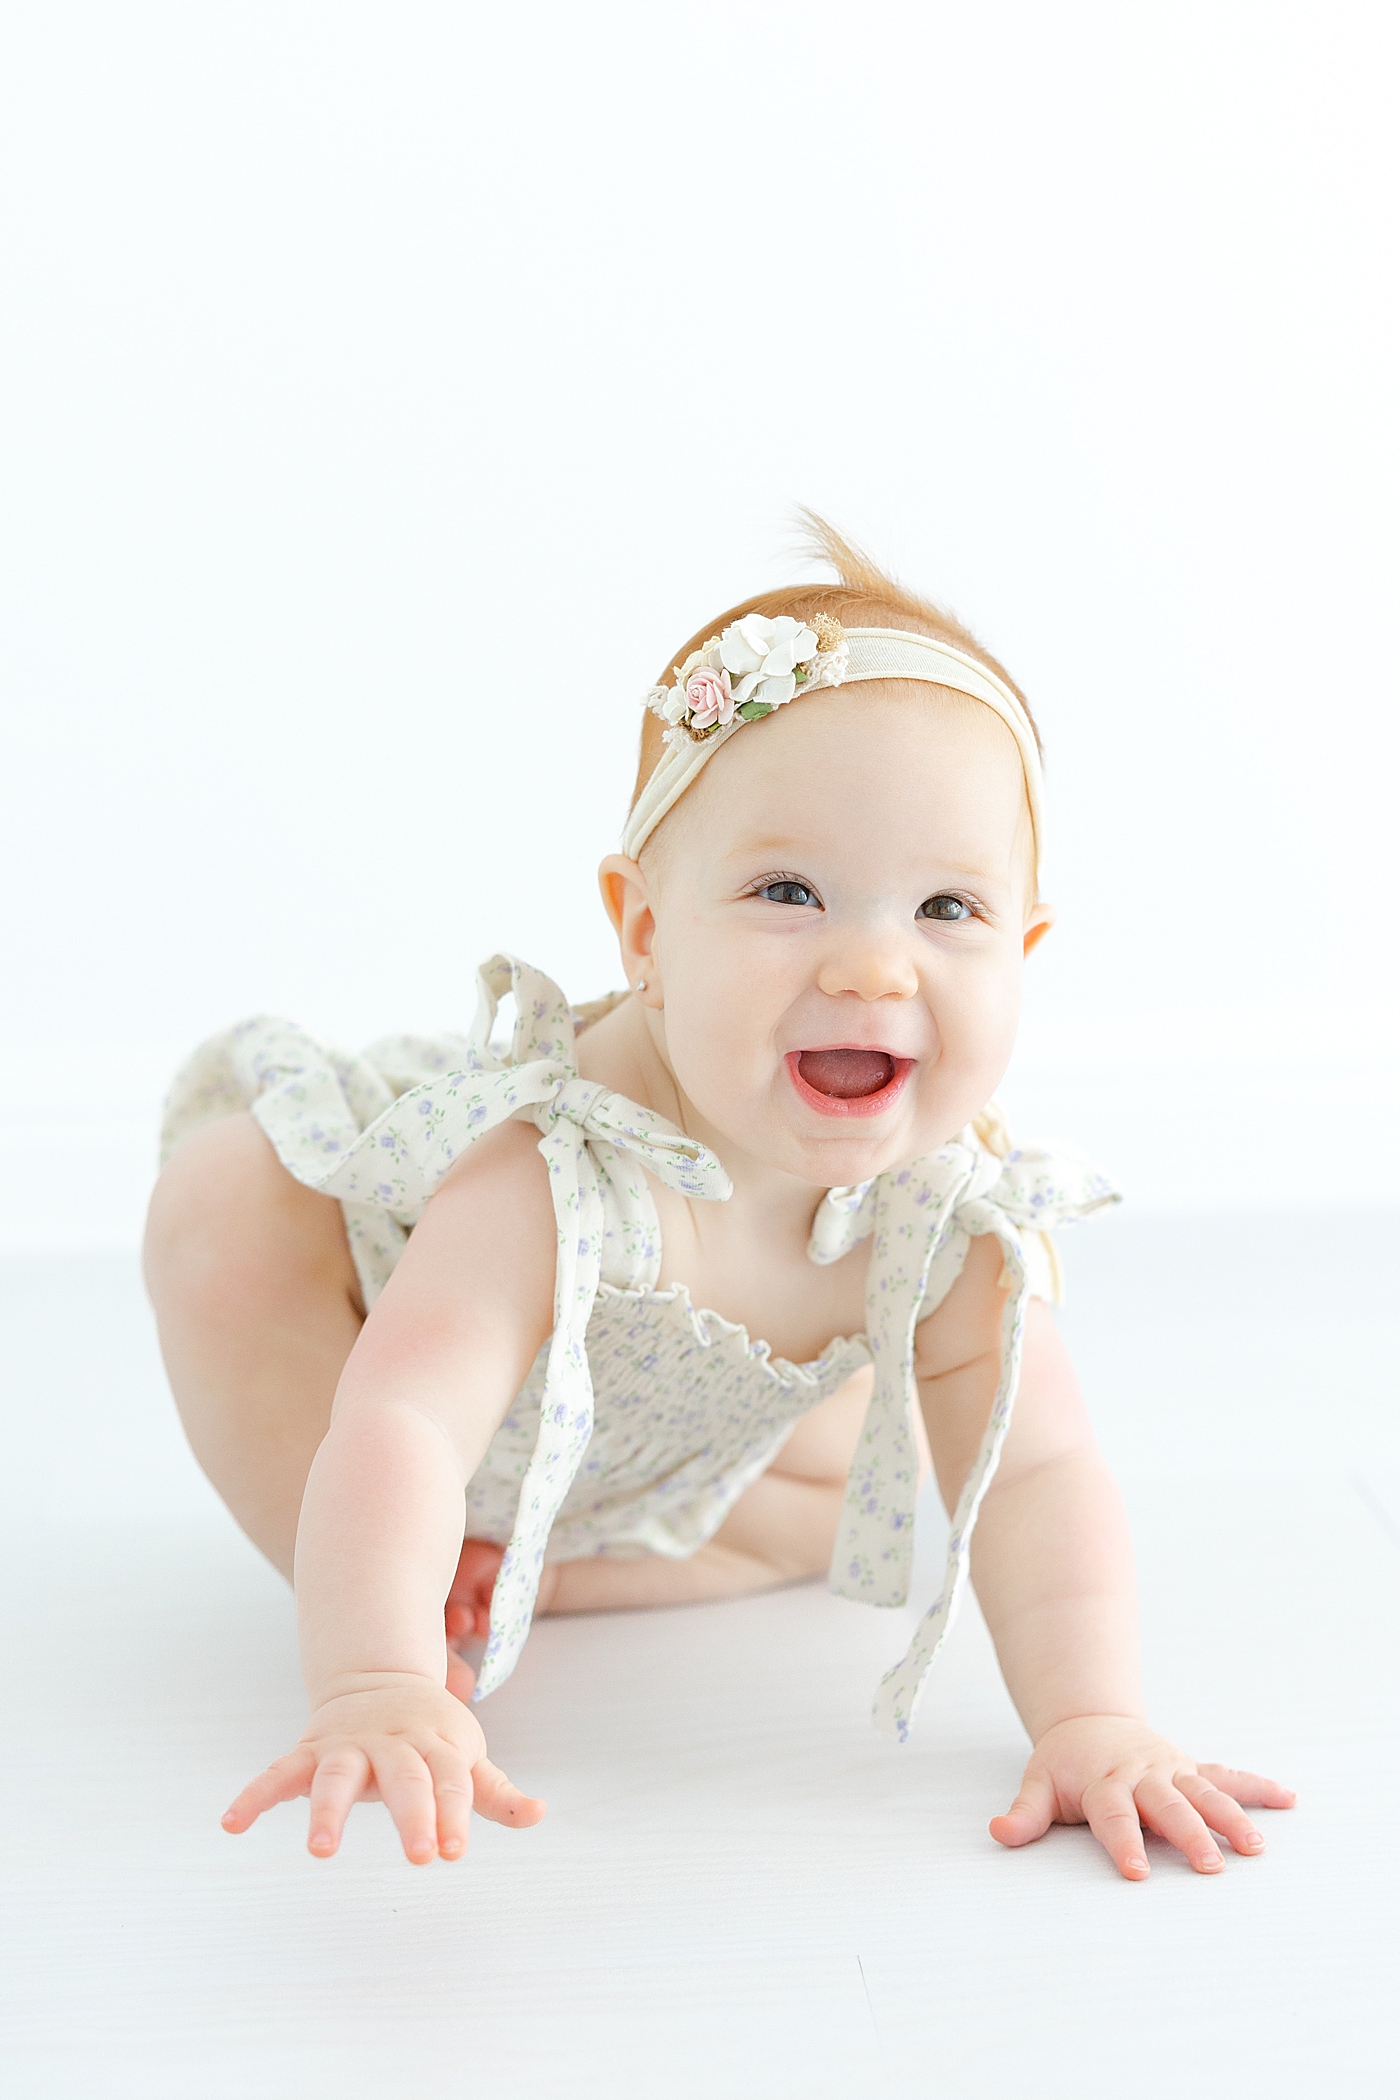 Baby girl crawling in the studio | Image by Sana Ahmed Photography